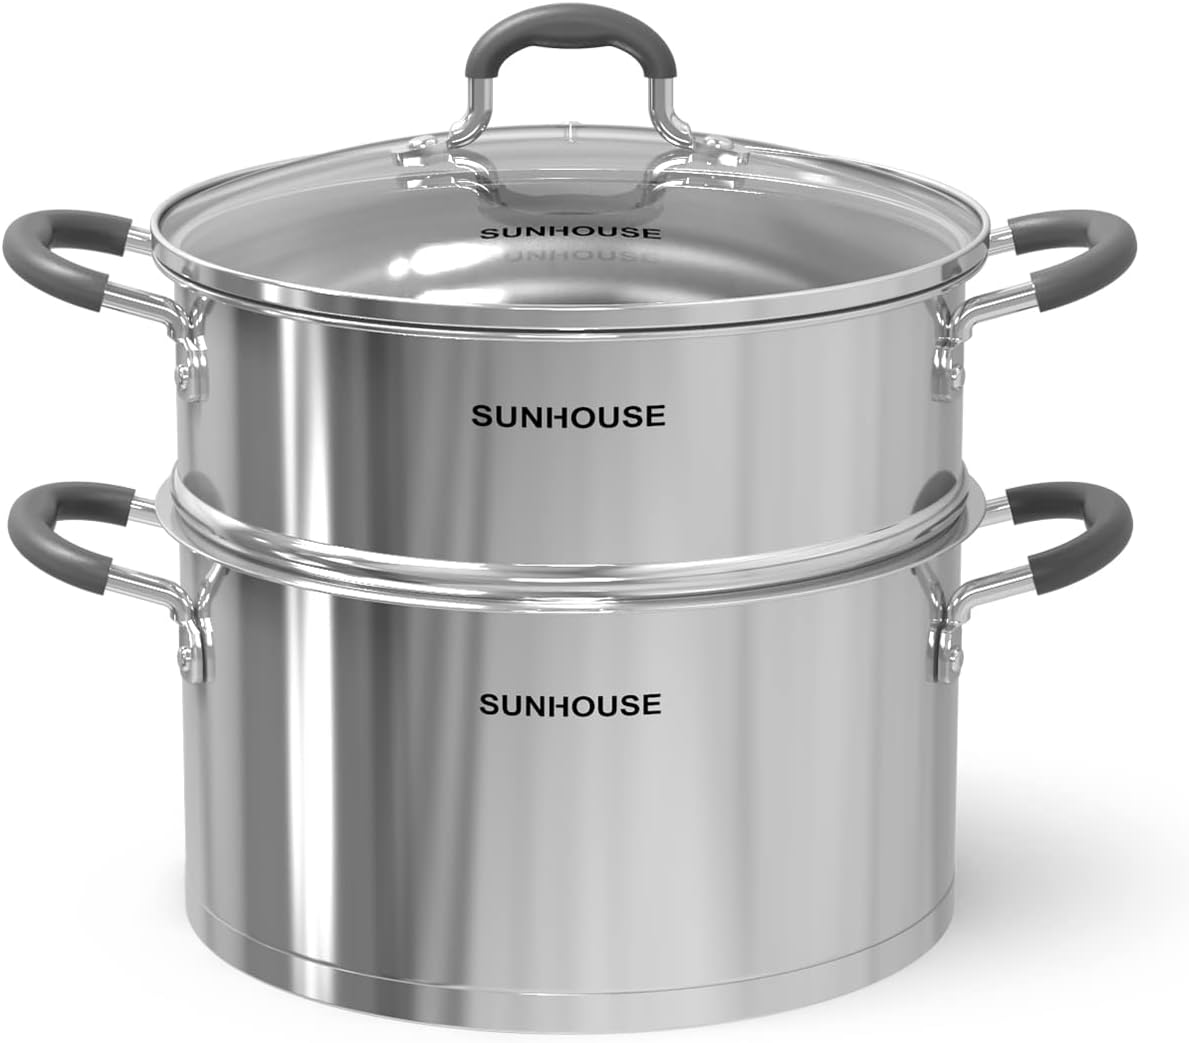 https://bigbigmart.com/wp-content/uploads/2023/11/Sunhouse-5.5-Quarts-Multipurpose-Stock-Pot-and-Steamer-Pot-with-PFOA-free18-10-Stainless-Steel-Steam-Pot-for-Cooking-Vegetables-Seafood-Cooking-Pot-with-Lid-Suitable-for-Soups-Stews-and-Pasta.jpg